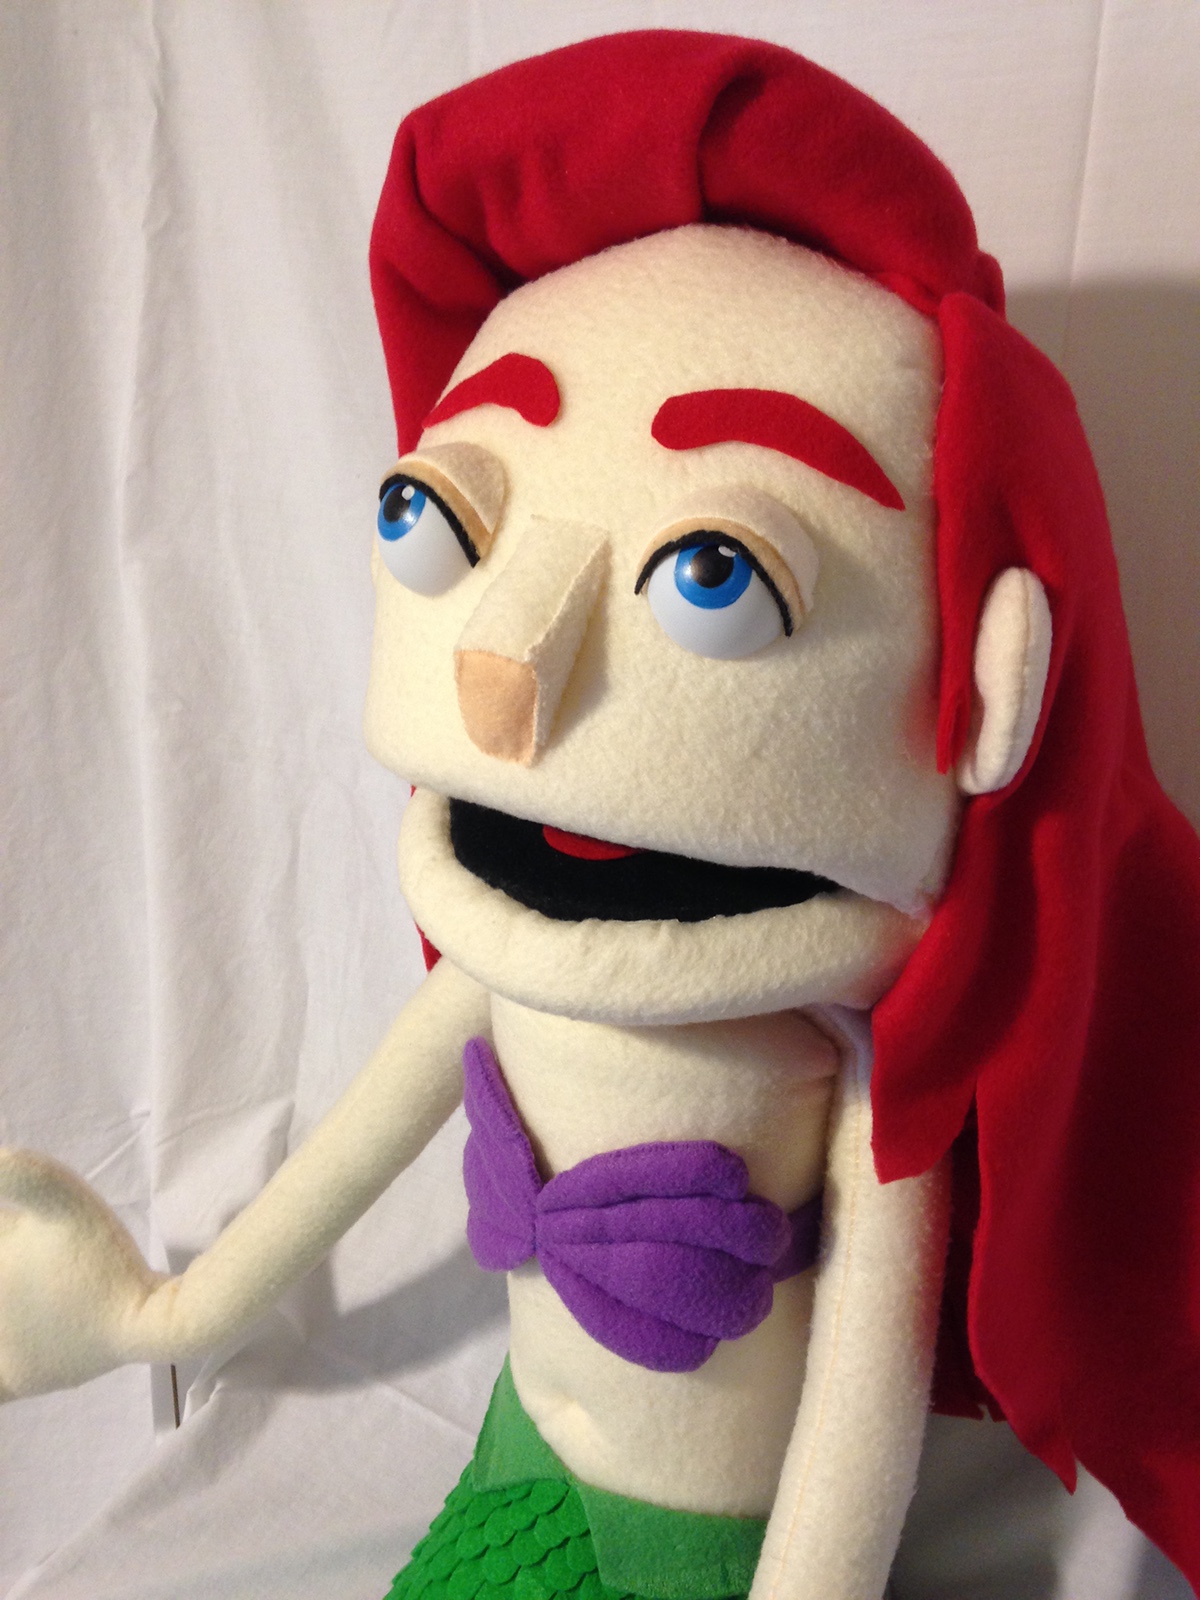 mermaid puppet hand and rod redhead